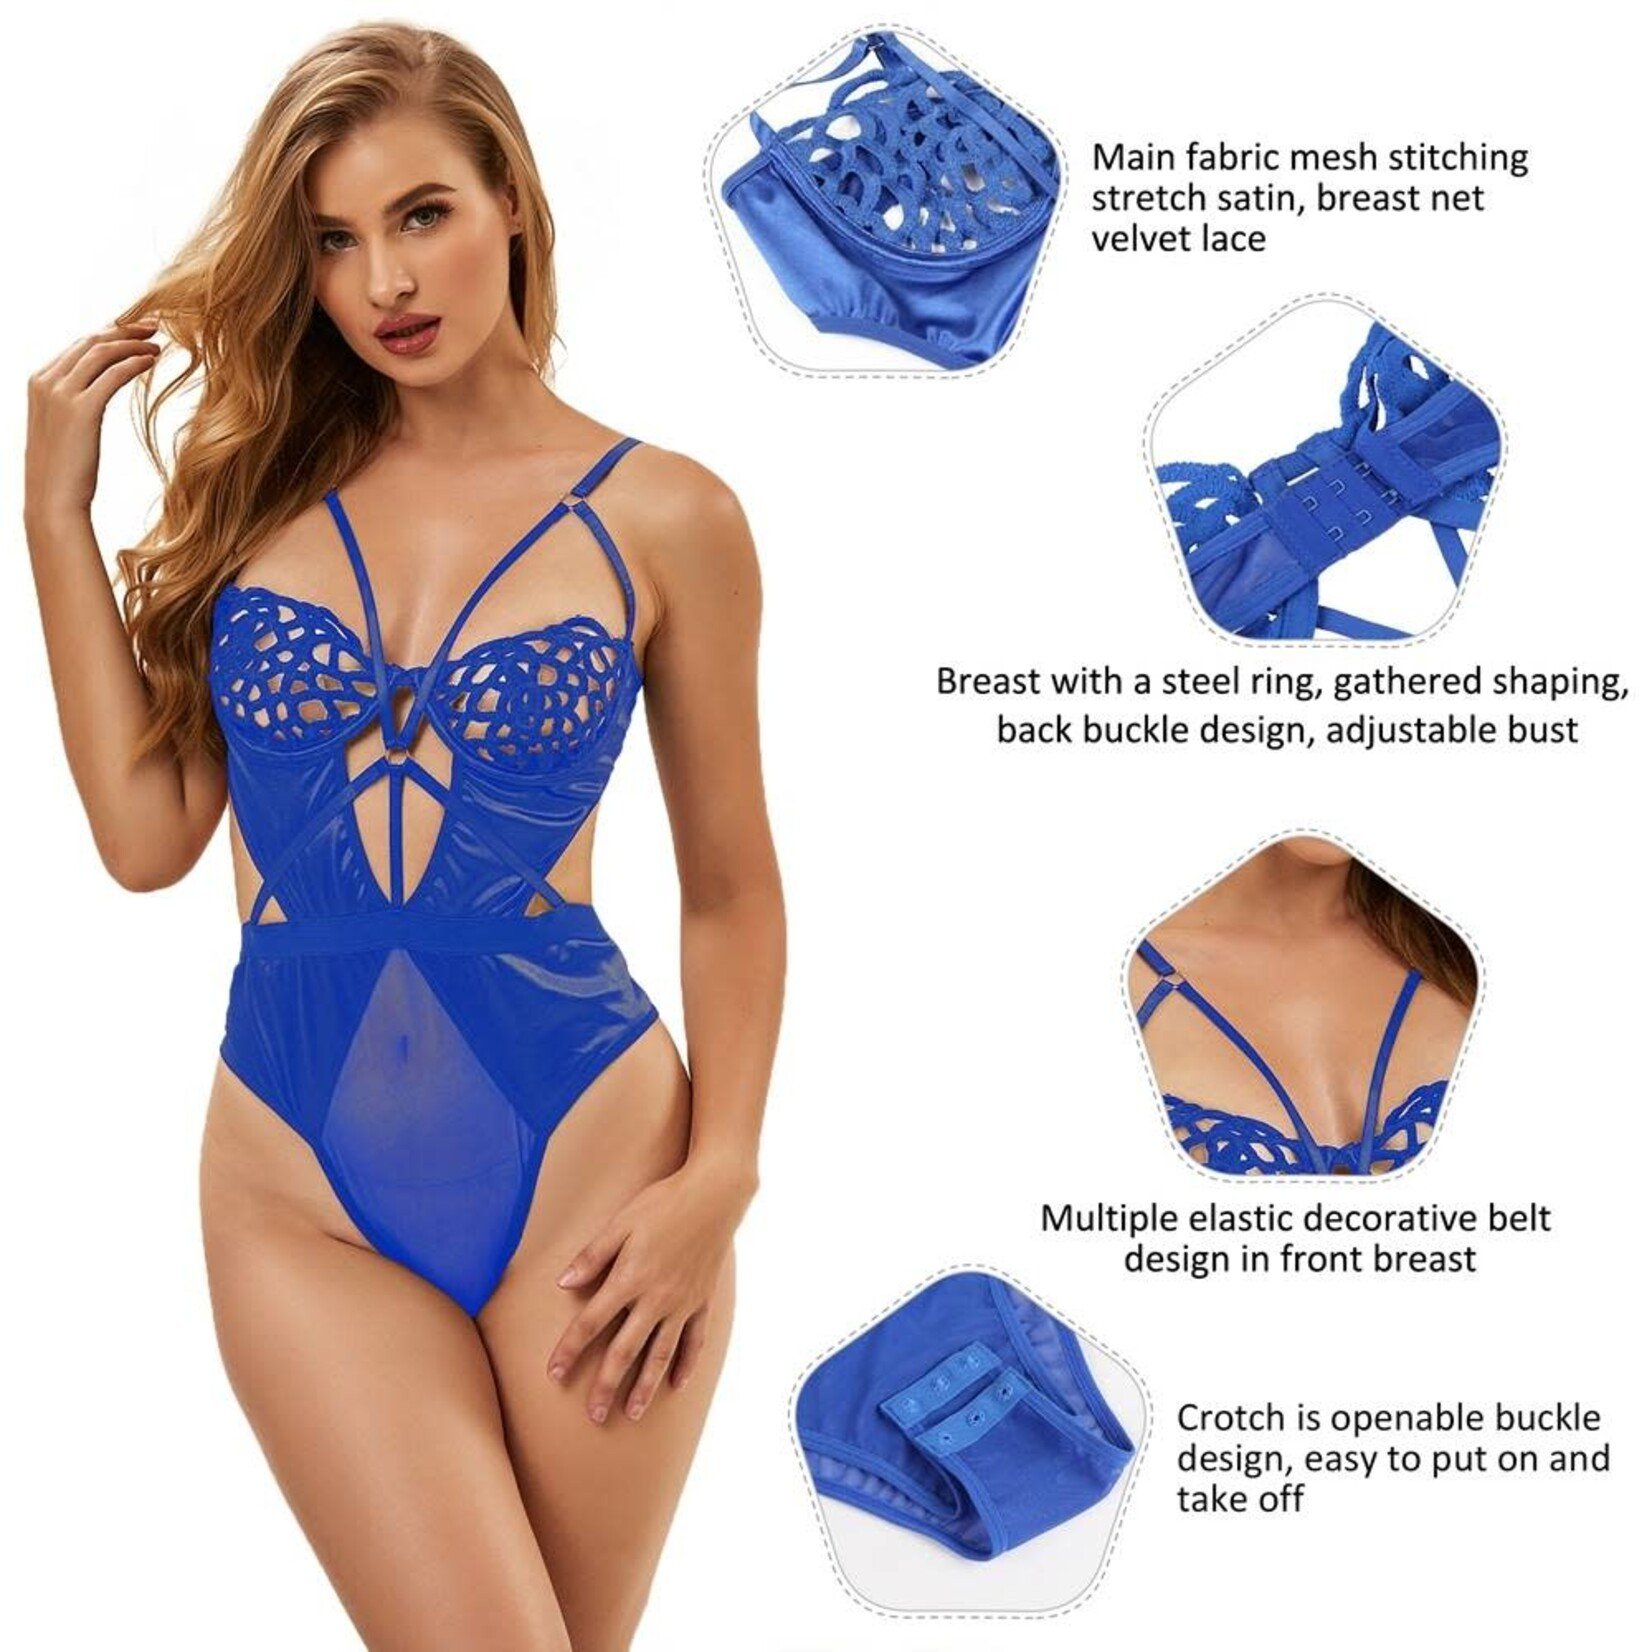 OH YEAH! -  CROTCH OPEN BLUE LACE SPLICING EXQUISITE HOLLOW OUT CUP TEDDY WITH UNDERWIRE XS-S